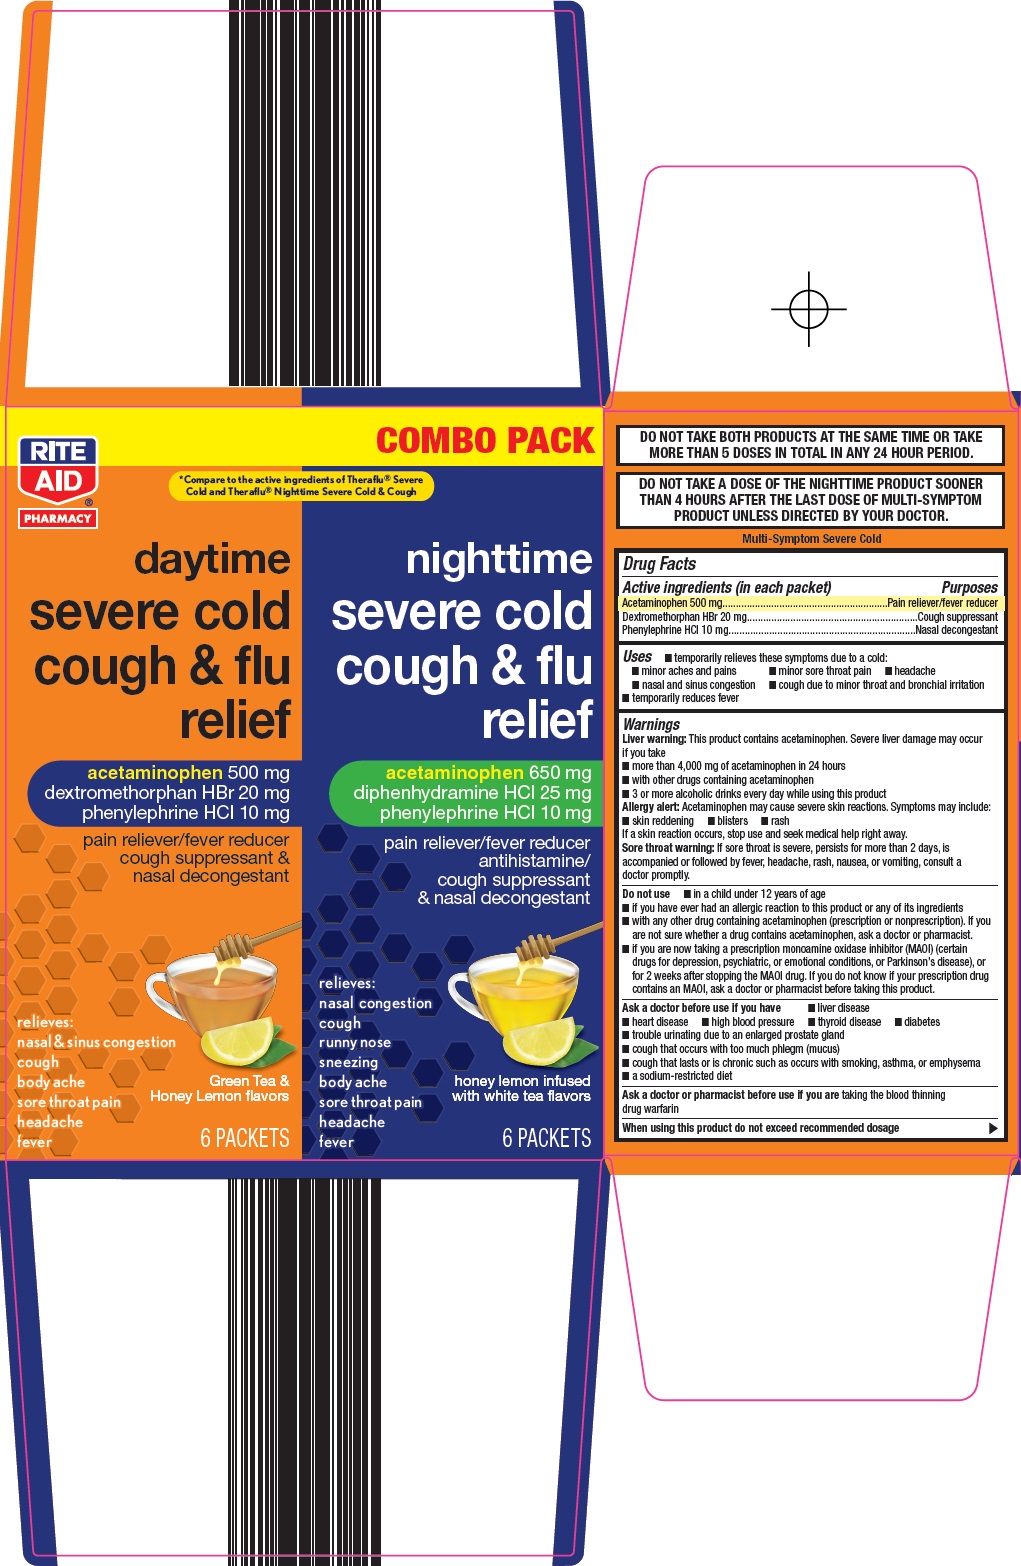 daytime nighttime severe cold cough & flu relief carton image 1